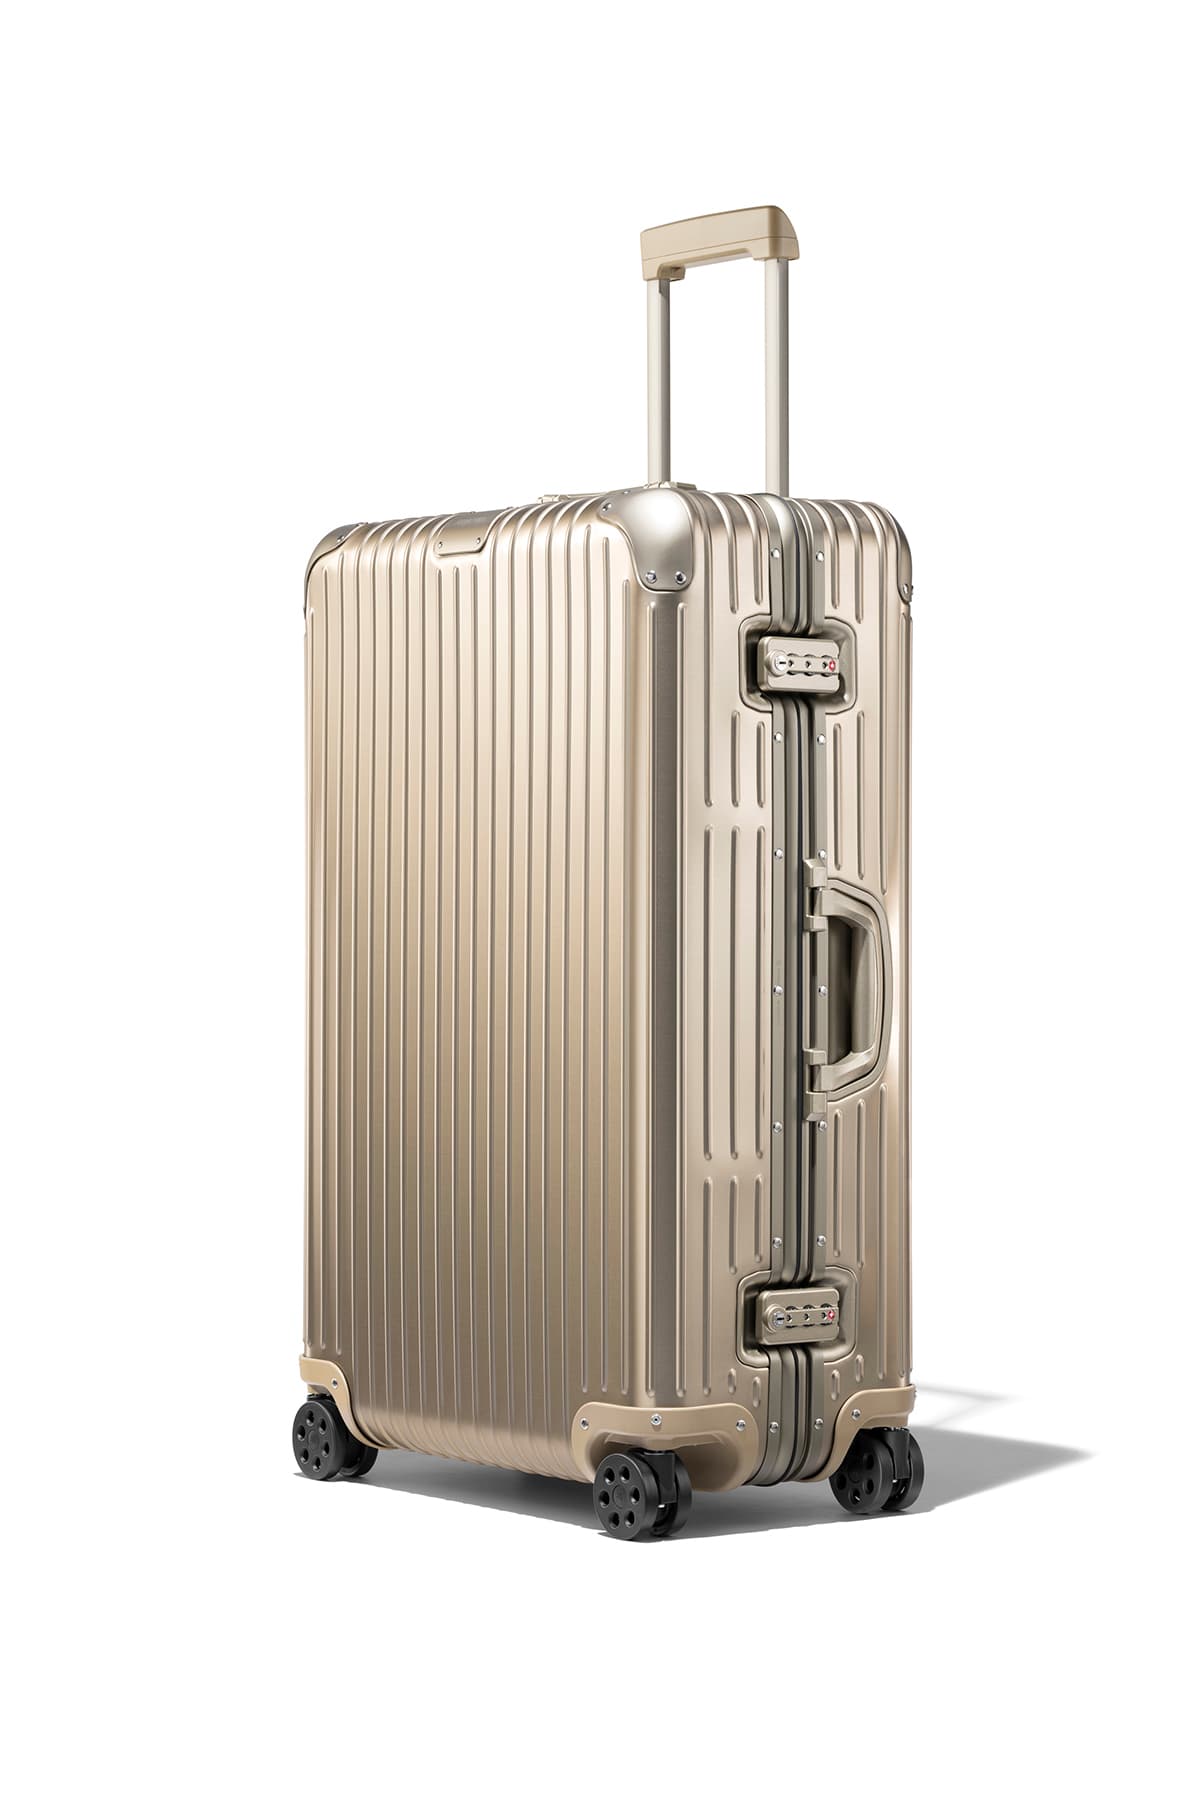 Are Rimowa Suitcases Worth the Cost?